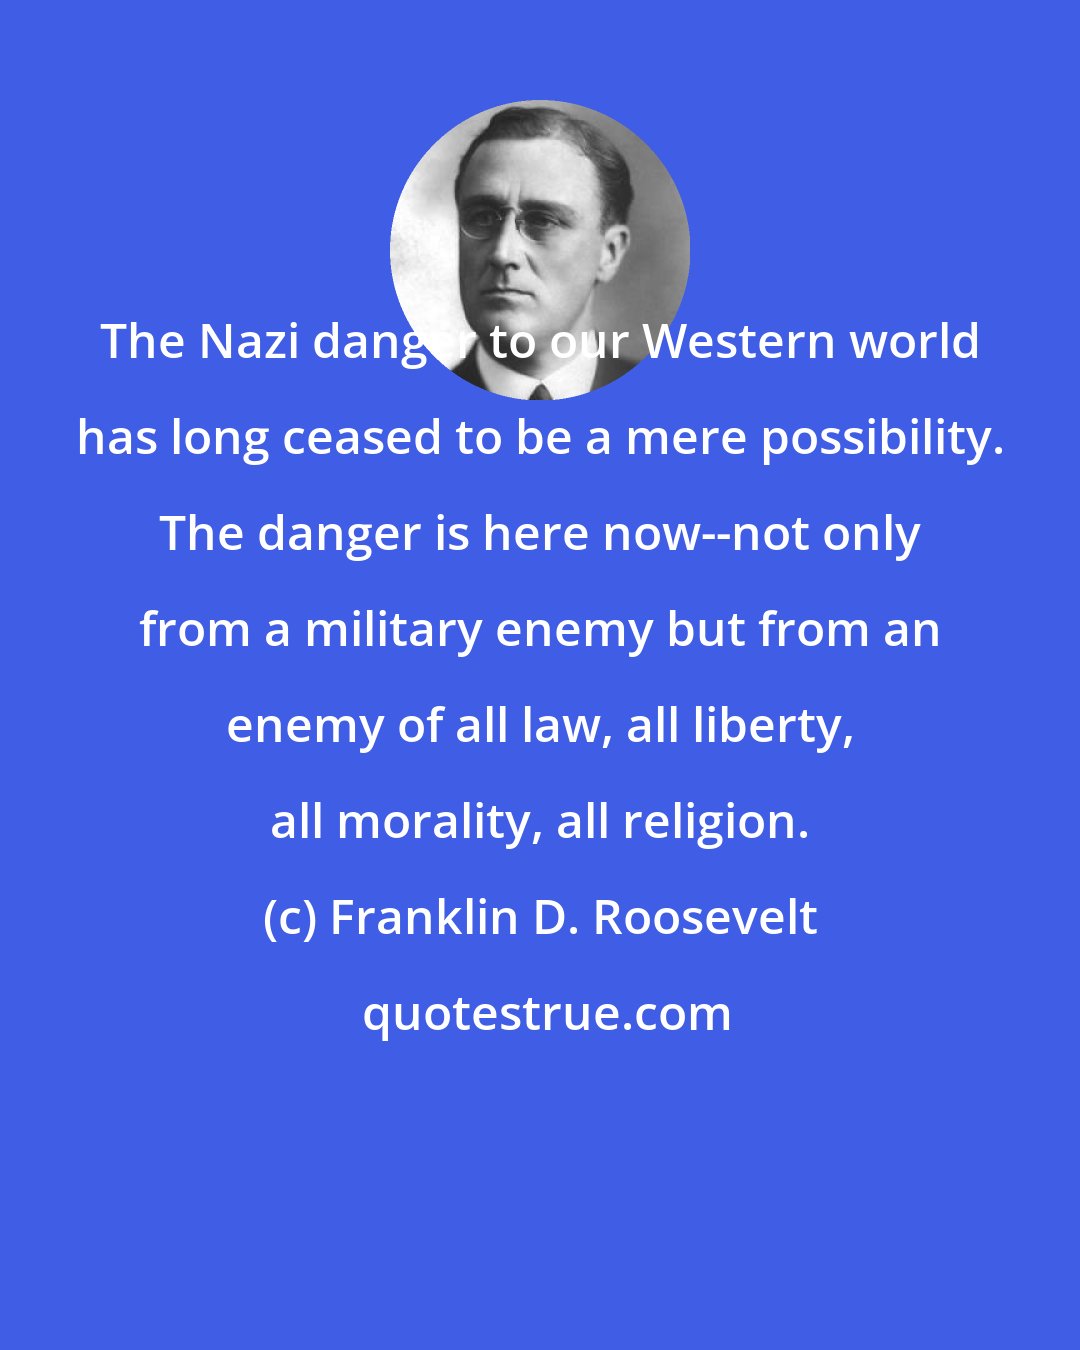 Franklin D. Roosevelt: The Nazi danger to our Western world has long ceased to be a mere possibility. The danger is here now--not only from a military enemy but from an enemy of all law, all liberty, all morality, all religion.